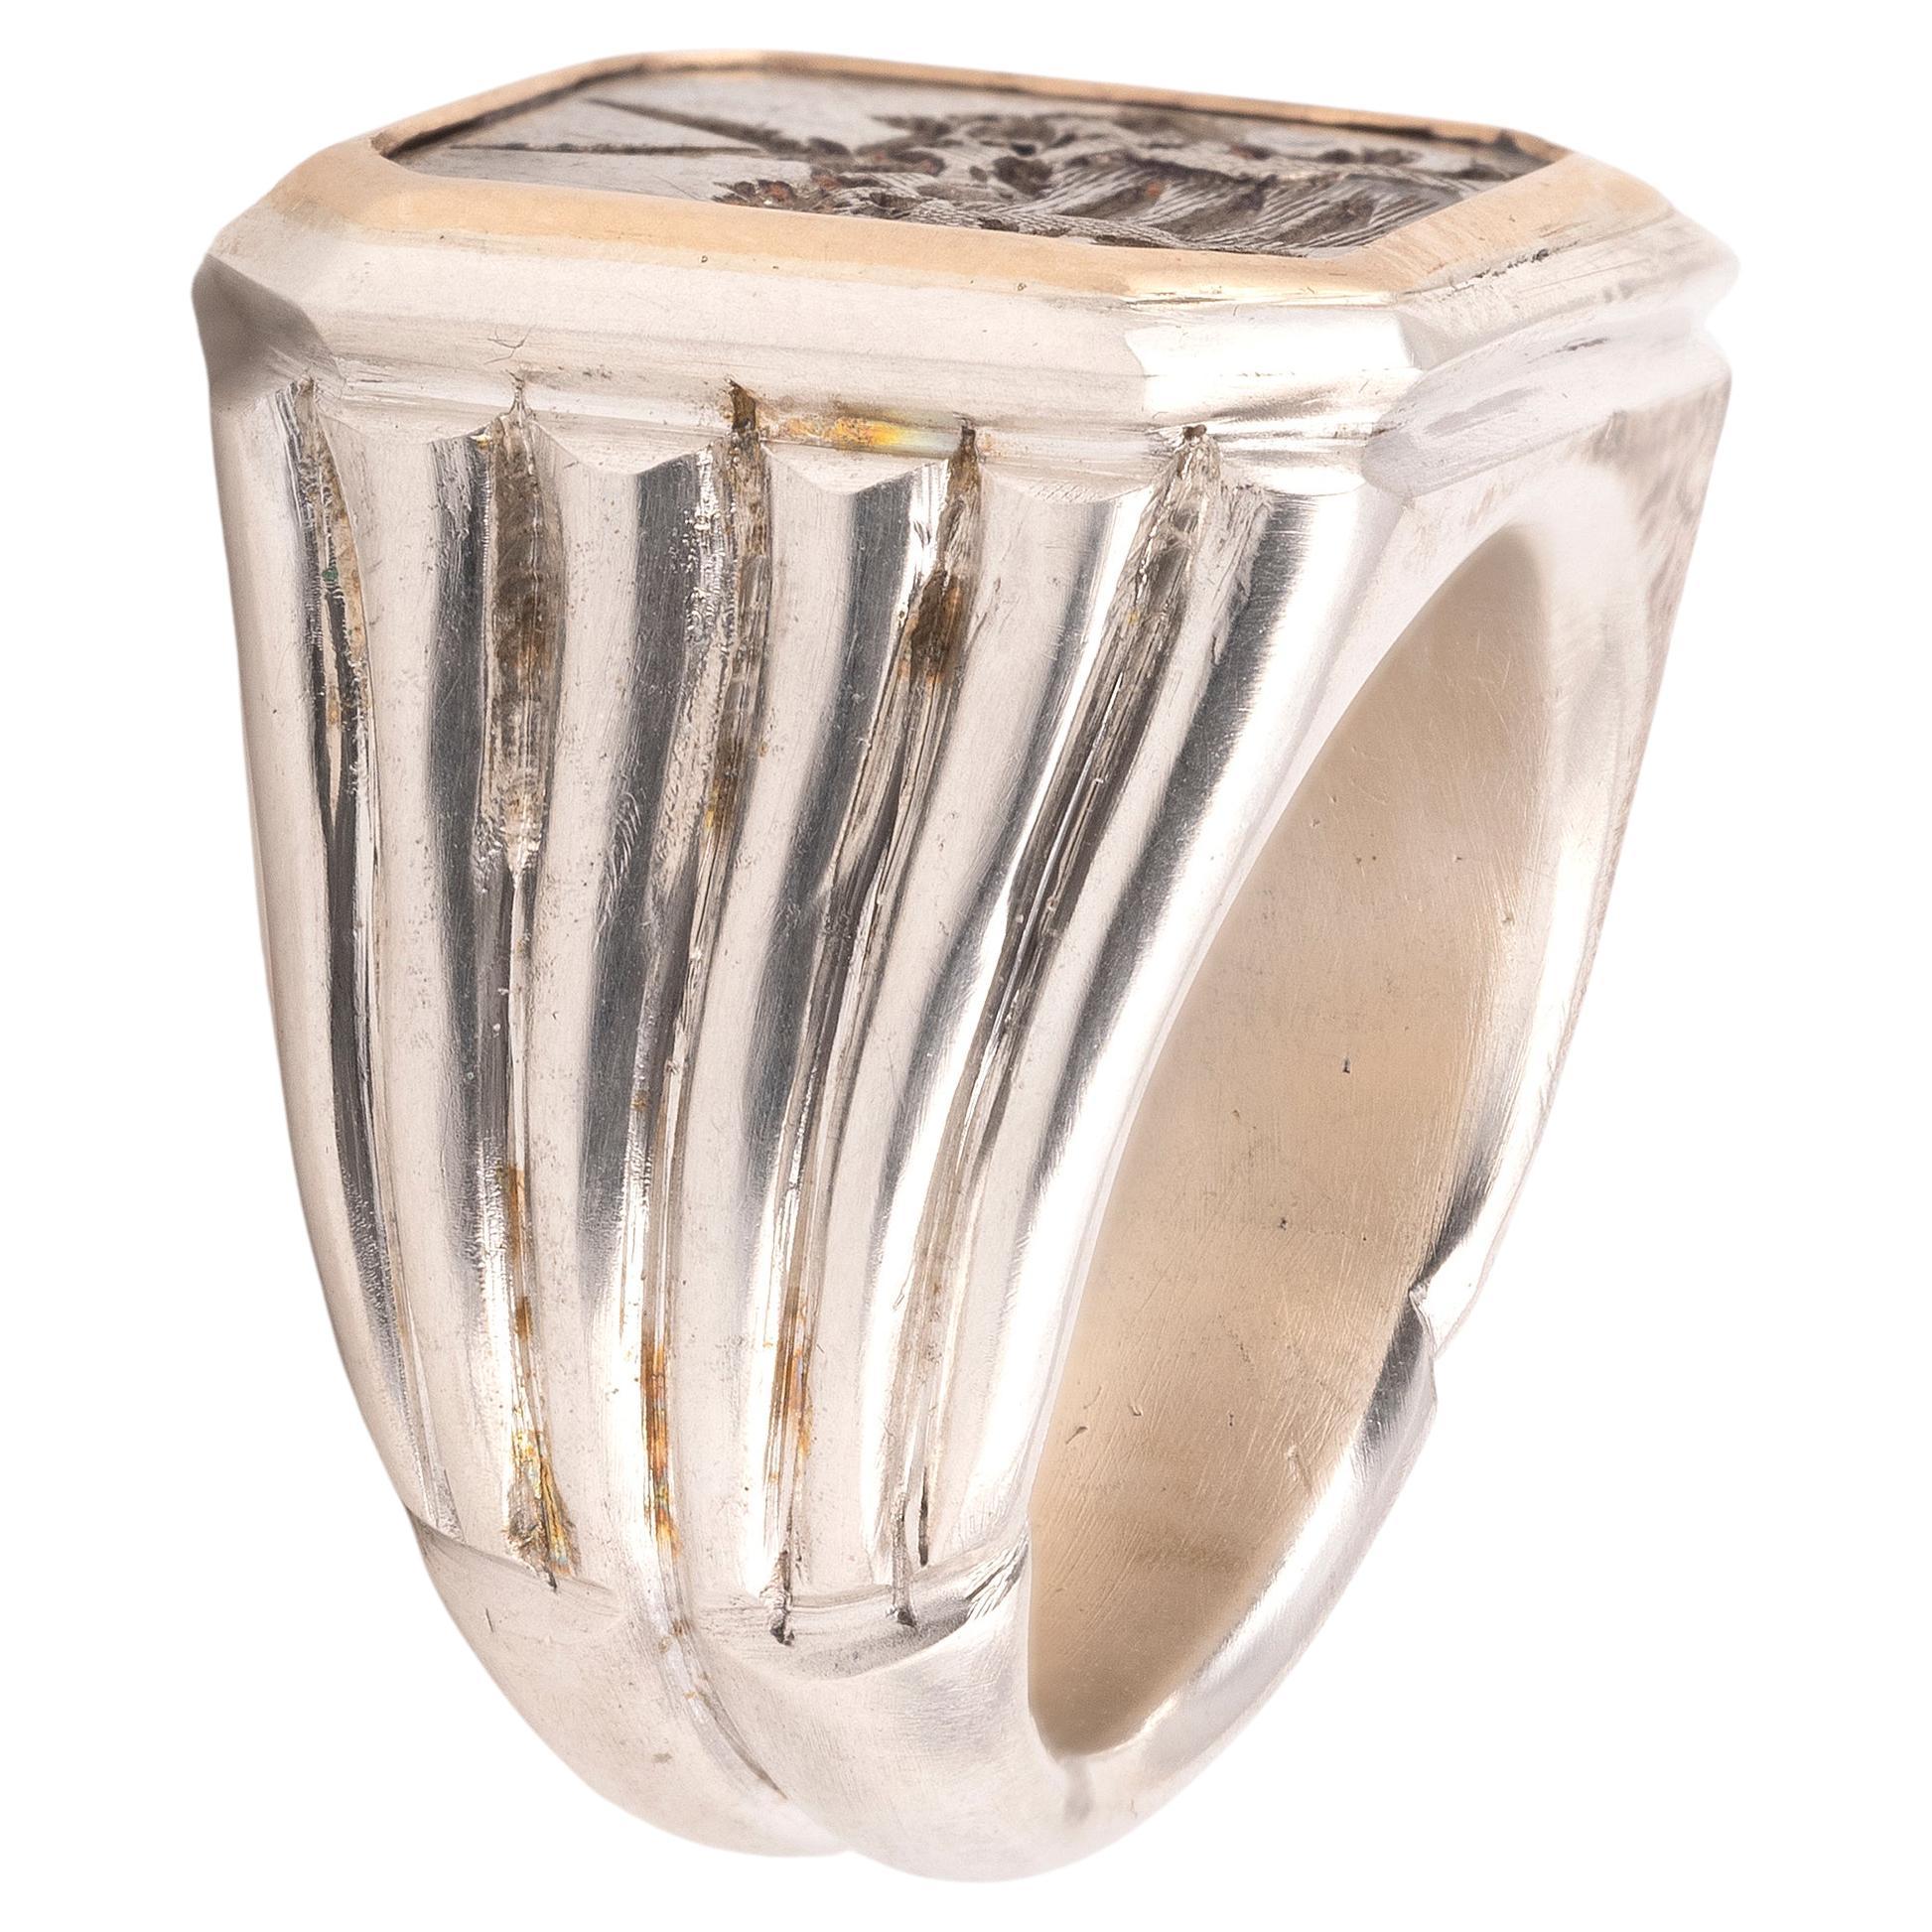 Italian, 1750s An antique silver ring is finely hand-engraved with a noble coat-of-arms. 
Top size 22mm x 21mm
Size 11
Weight : 43.25gr.